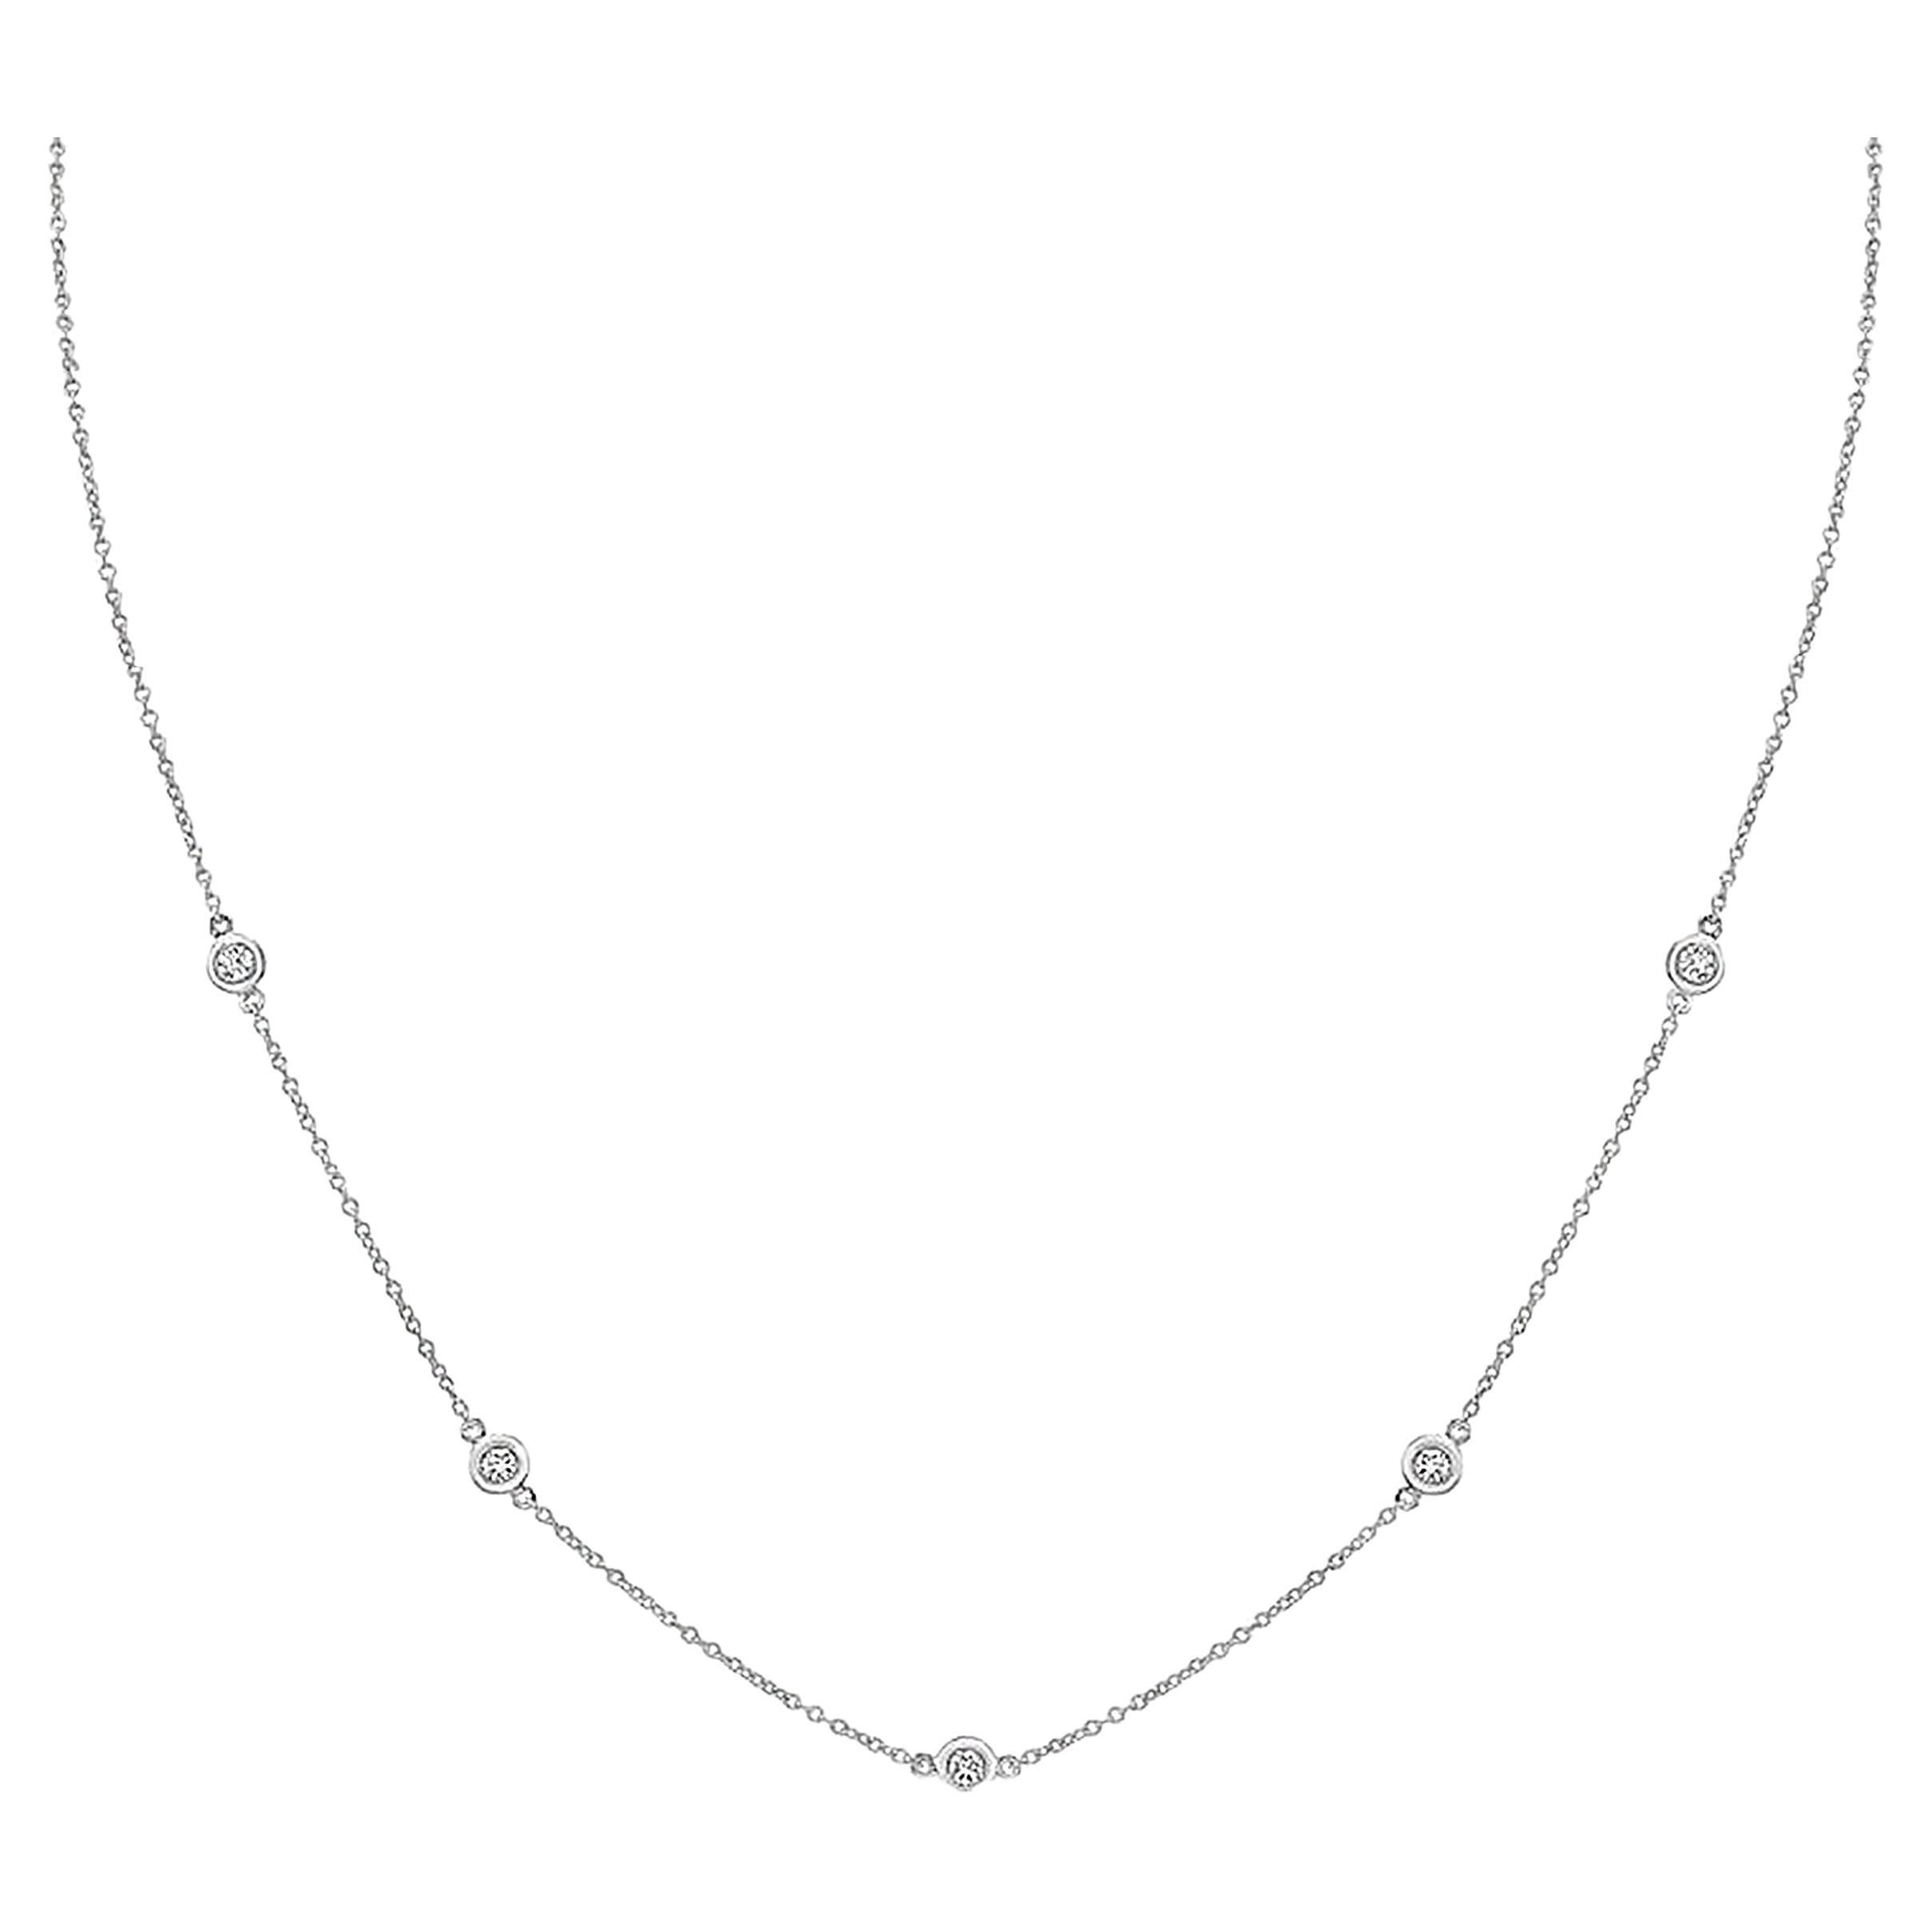 0.25 Carat Diamond by the Yard Chain Necklace in 14K White Gold